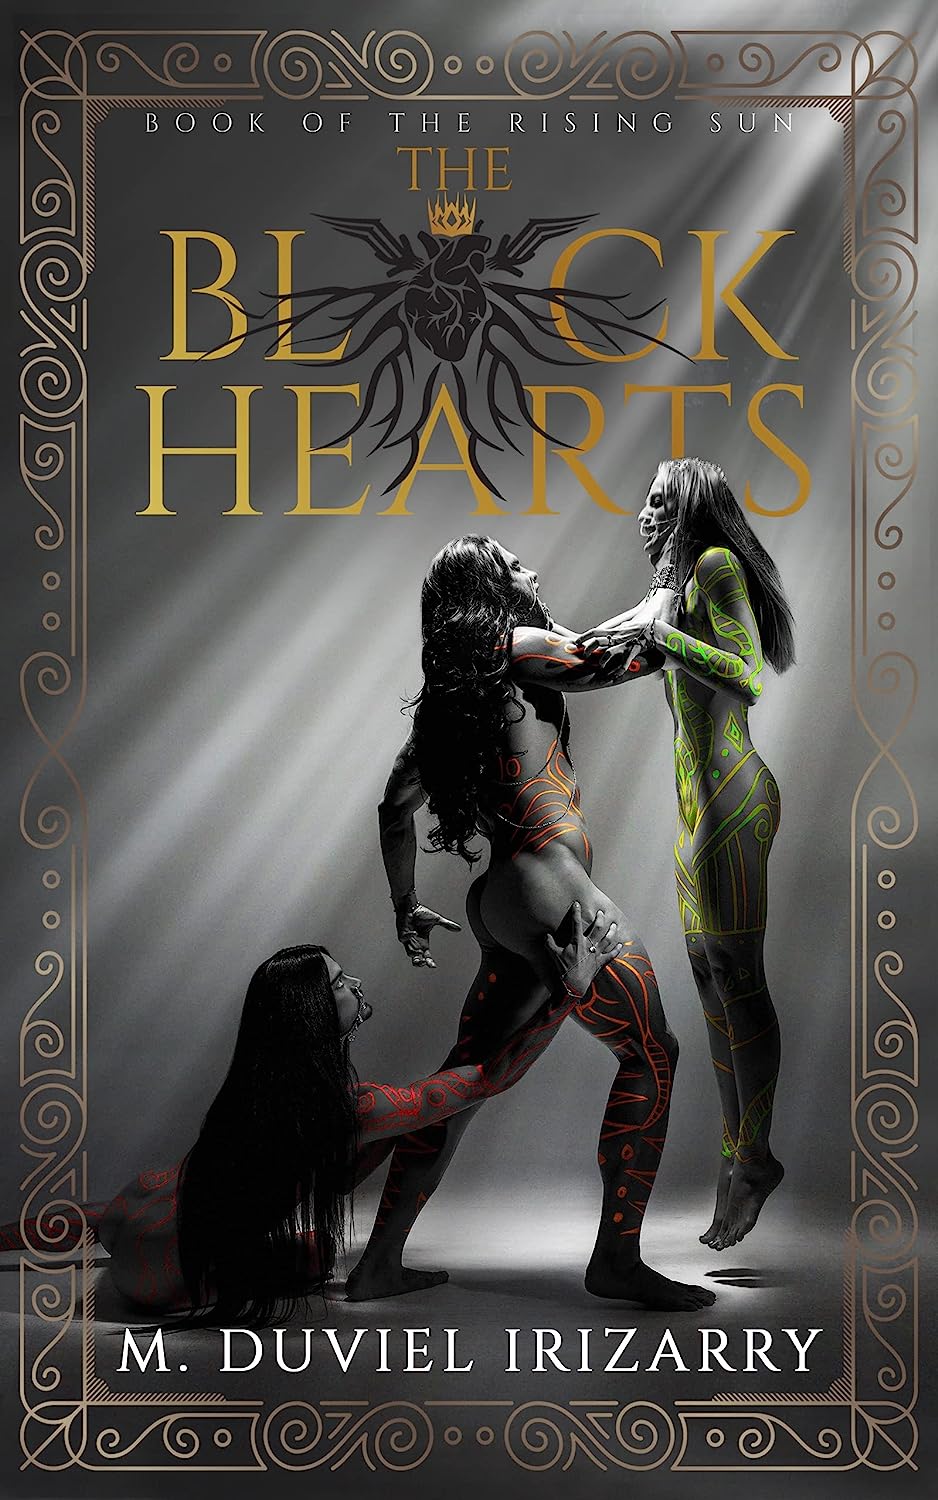 New fantasy novel, "The Black Hearts: Book of the Rising Sun" by M. Duviel Irizarry is released, an epic tale of tragedy, villainy, and lust for power amidst kingdoms at the brink of war